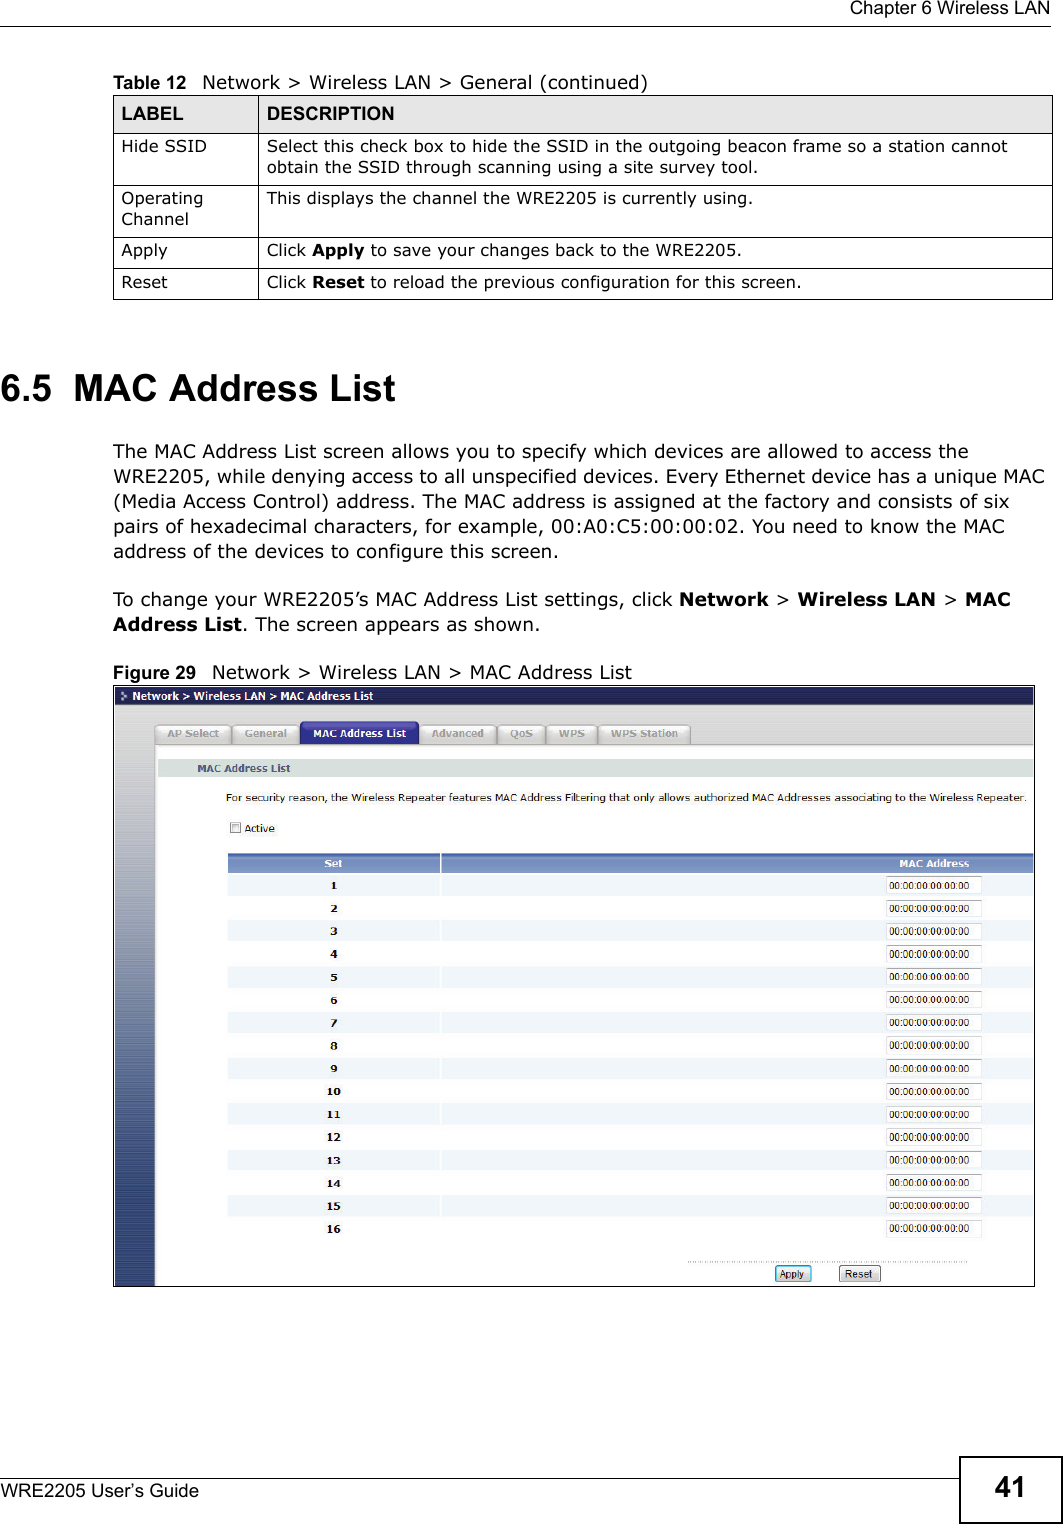  Chapter 6 Wireless LANWRE2205 User’s Guide 416.5  MAC Address ListThe MAC Address List screen allows you to specify which devices are allowed to access the WRE2205, while denying access to all unspecified devices. Every Ethernet device has a unique MAC (Media Access Control) address. The MAC address is assigned at the factory and consists of six pairs of hexadecimal characters, for example, 00:A0:C5:00:00:02. You need to know the MAC address of the devices to configure this screen.To change your WRE2205’s MAC Address List settings, click Network &gt; Wireless LAN &gt; MAC Address List. The screen appears as shown.Figure 29   Network &gt; Wireless LAN &gt; MAC Address ListHide SSID Select this check box to hide the SSID in the outgoing beacon frame so a station cannot obtain the SSID through scanning using a site survey tool.Operating Channel This displays the channel the WRE2205 is currently using.Apply Click Apply to save your changes back to the WRE2205.Reset Click Reset to reload the previous configuration for this screen.Table 12   Network &gt; Wireless LAN &gt; General (continued)LABEL DESCRIPTION